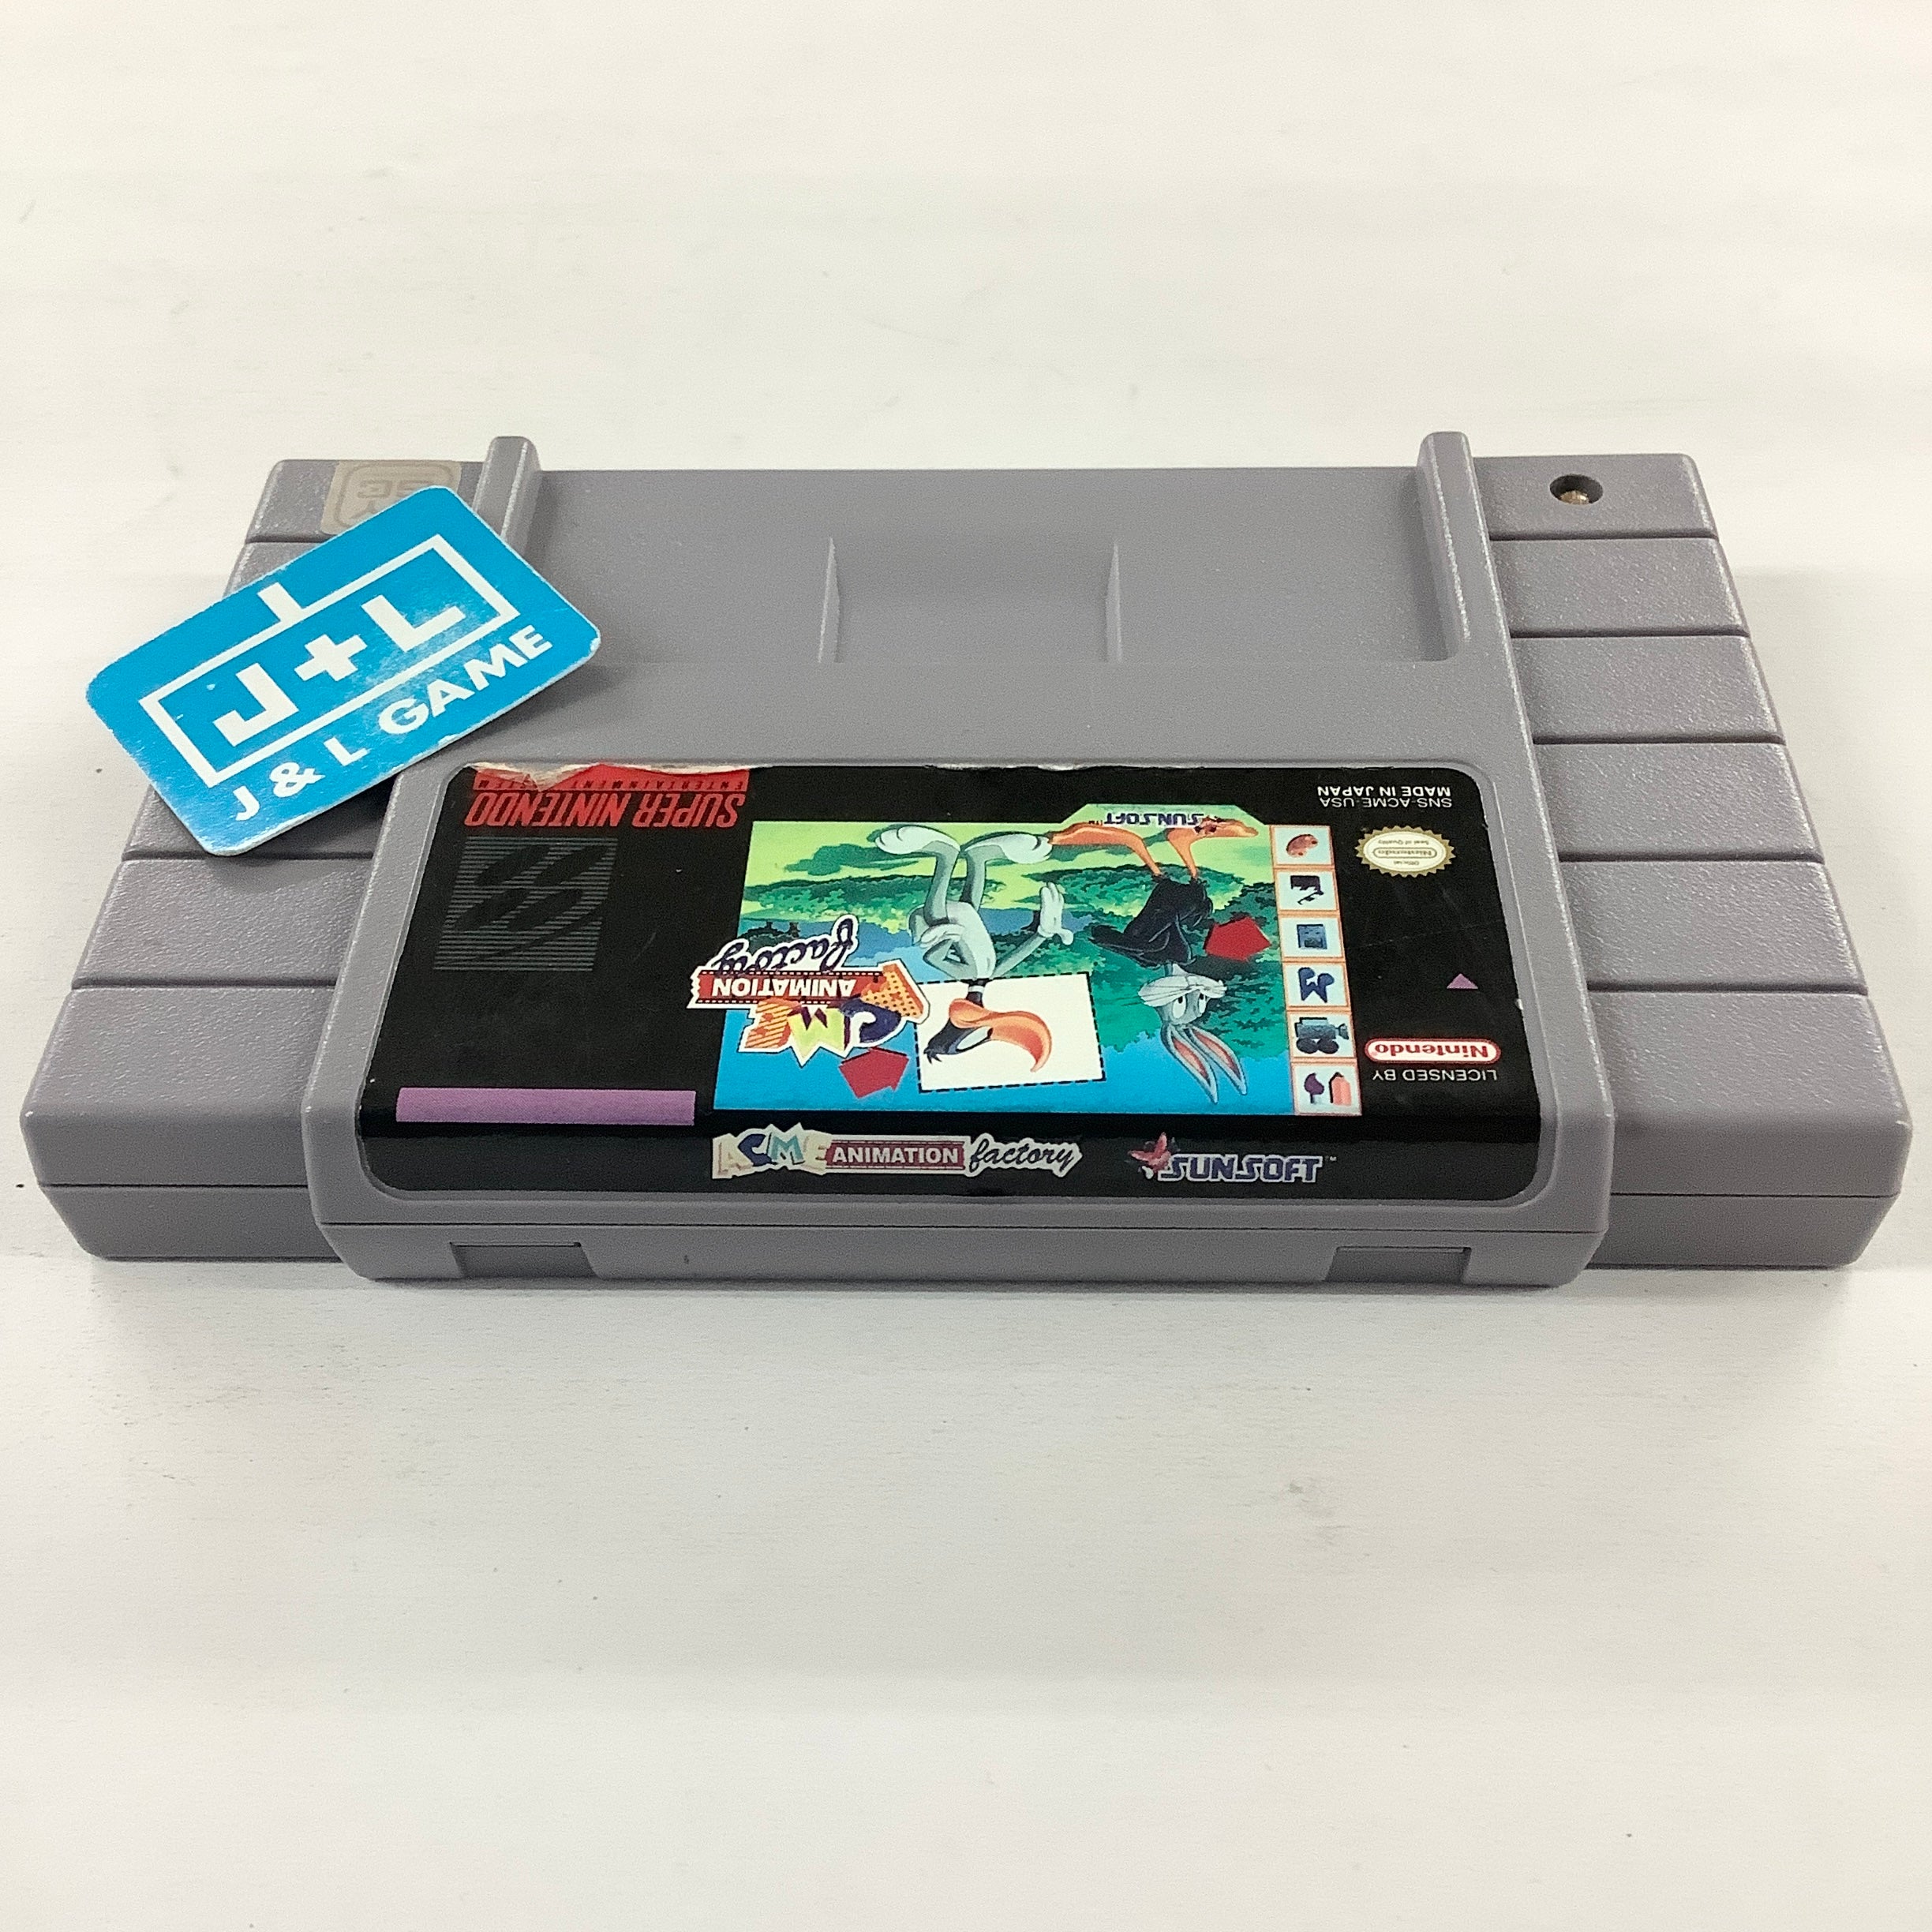 ACME Animation Factory - (SNES) Super Nintendo [Pre-Owned] Video Games SunSoft   